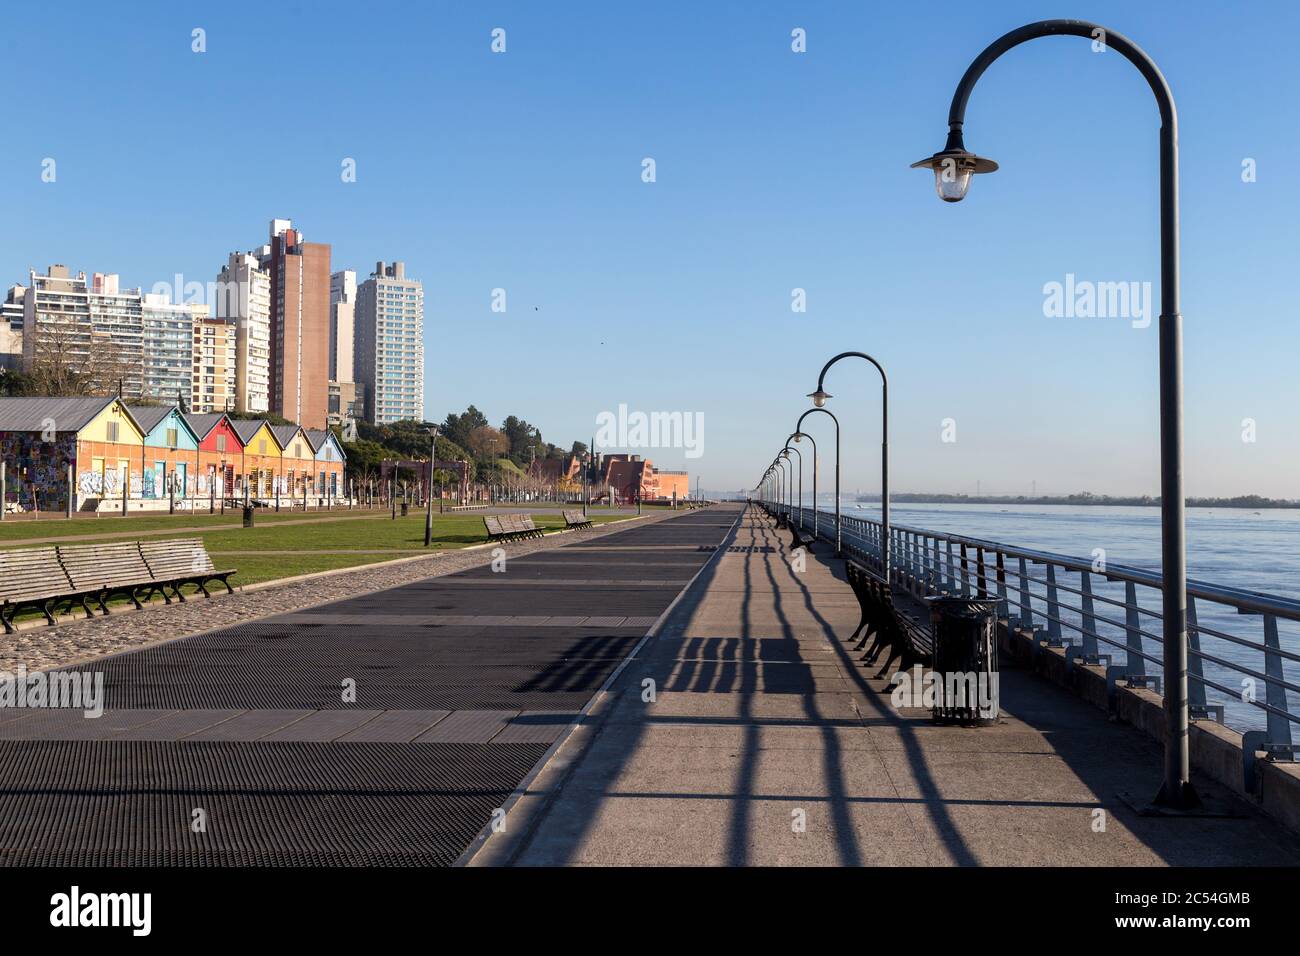 ROSARIO, ARGENTINA - JULY 6, 2019: View of the colorful warehouses of the CEC. Placed in the coastal park next to the Parana River. Classic promenade Stock Photo